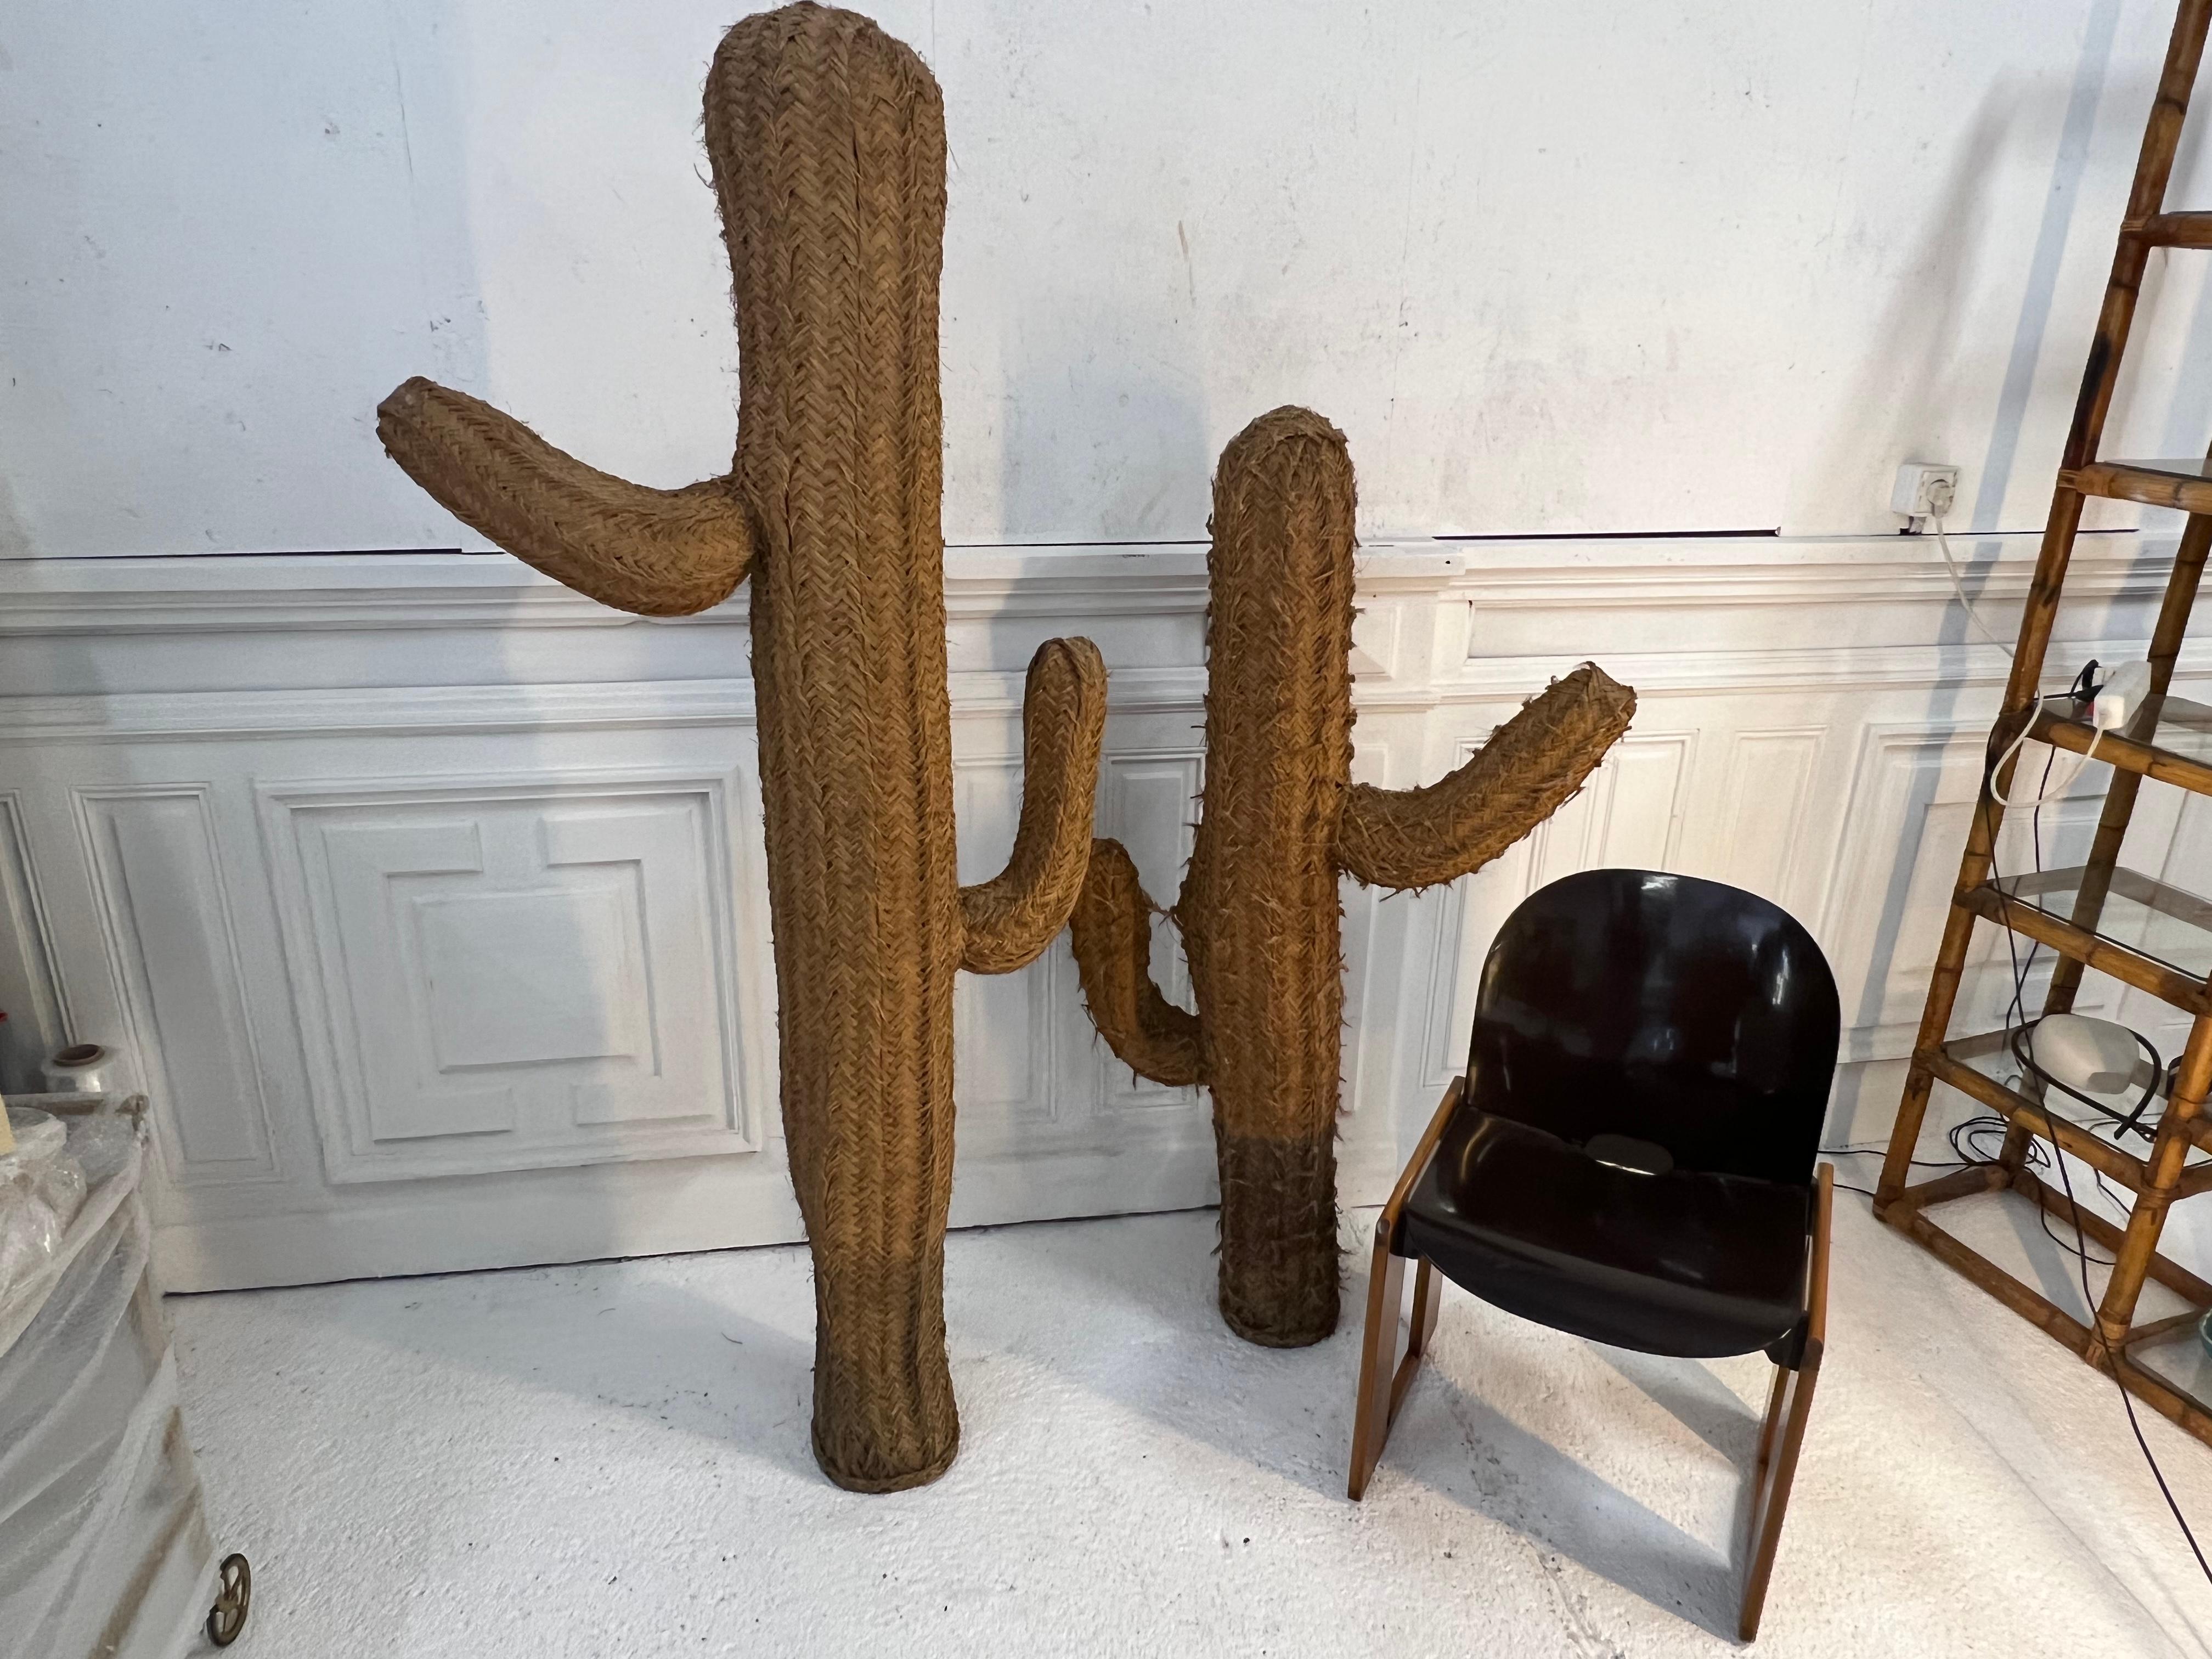 Large Wicker Cactus, 1970s Garden’s Decoration For Sale 3